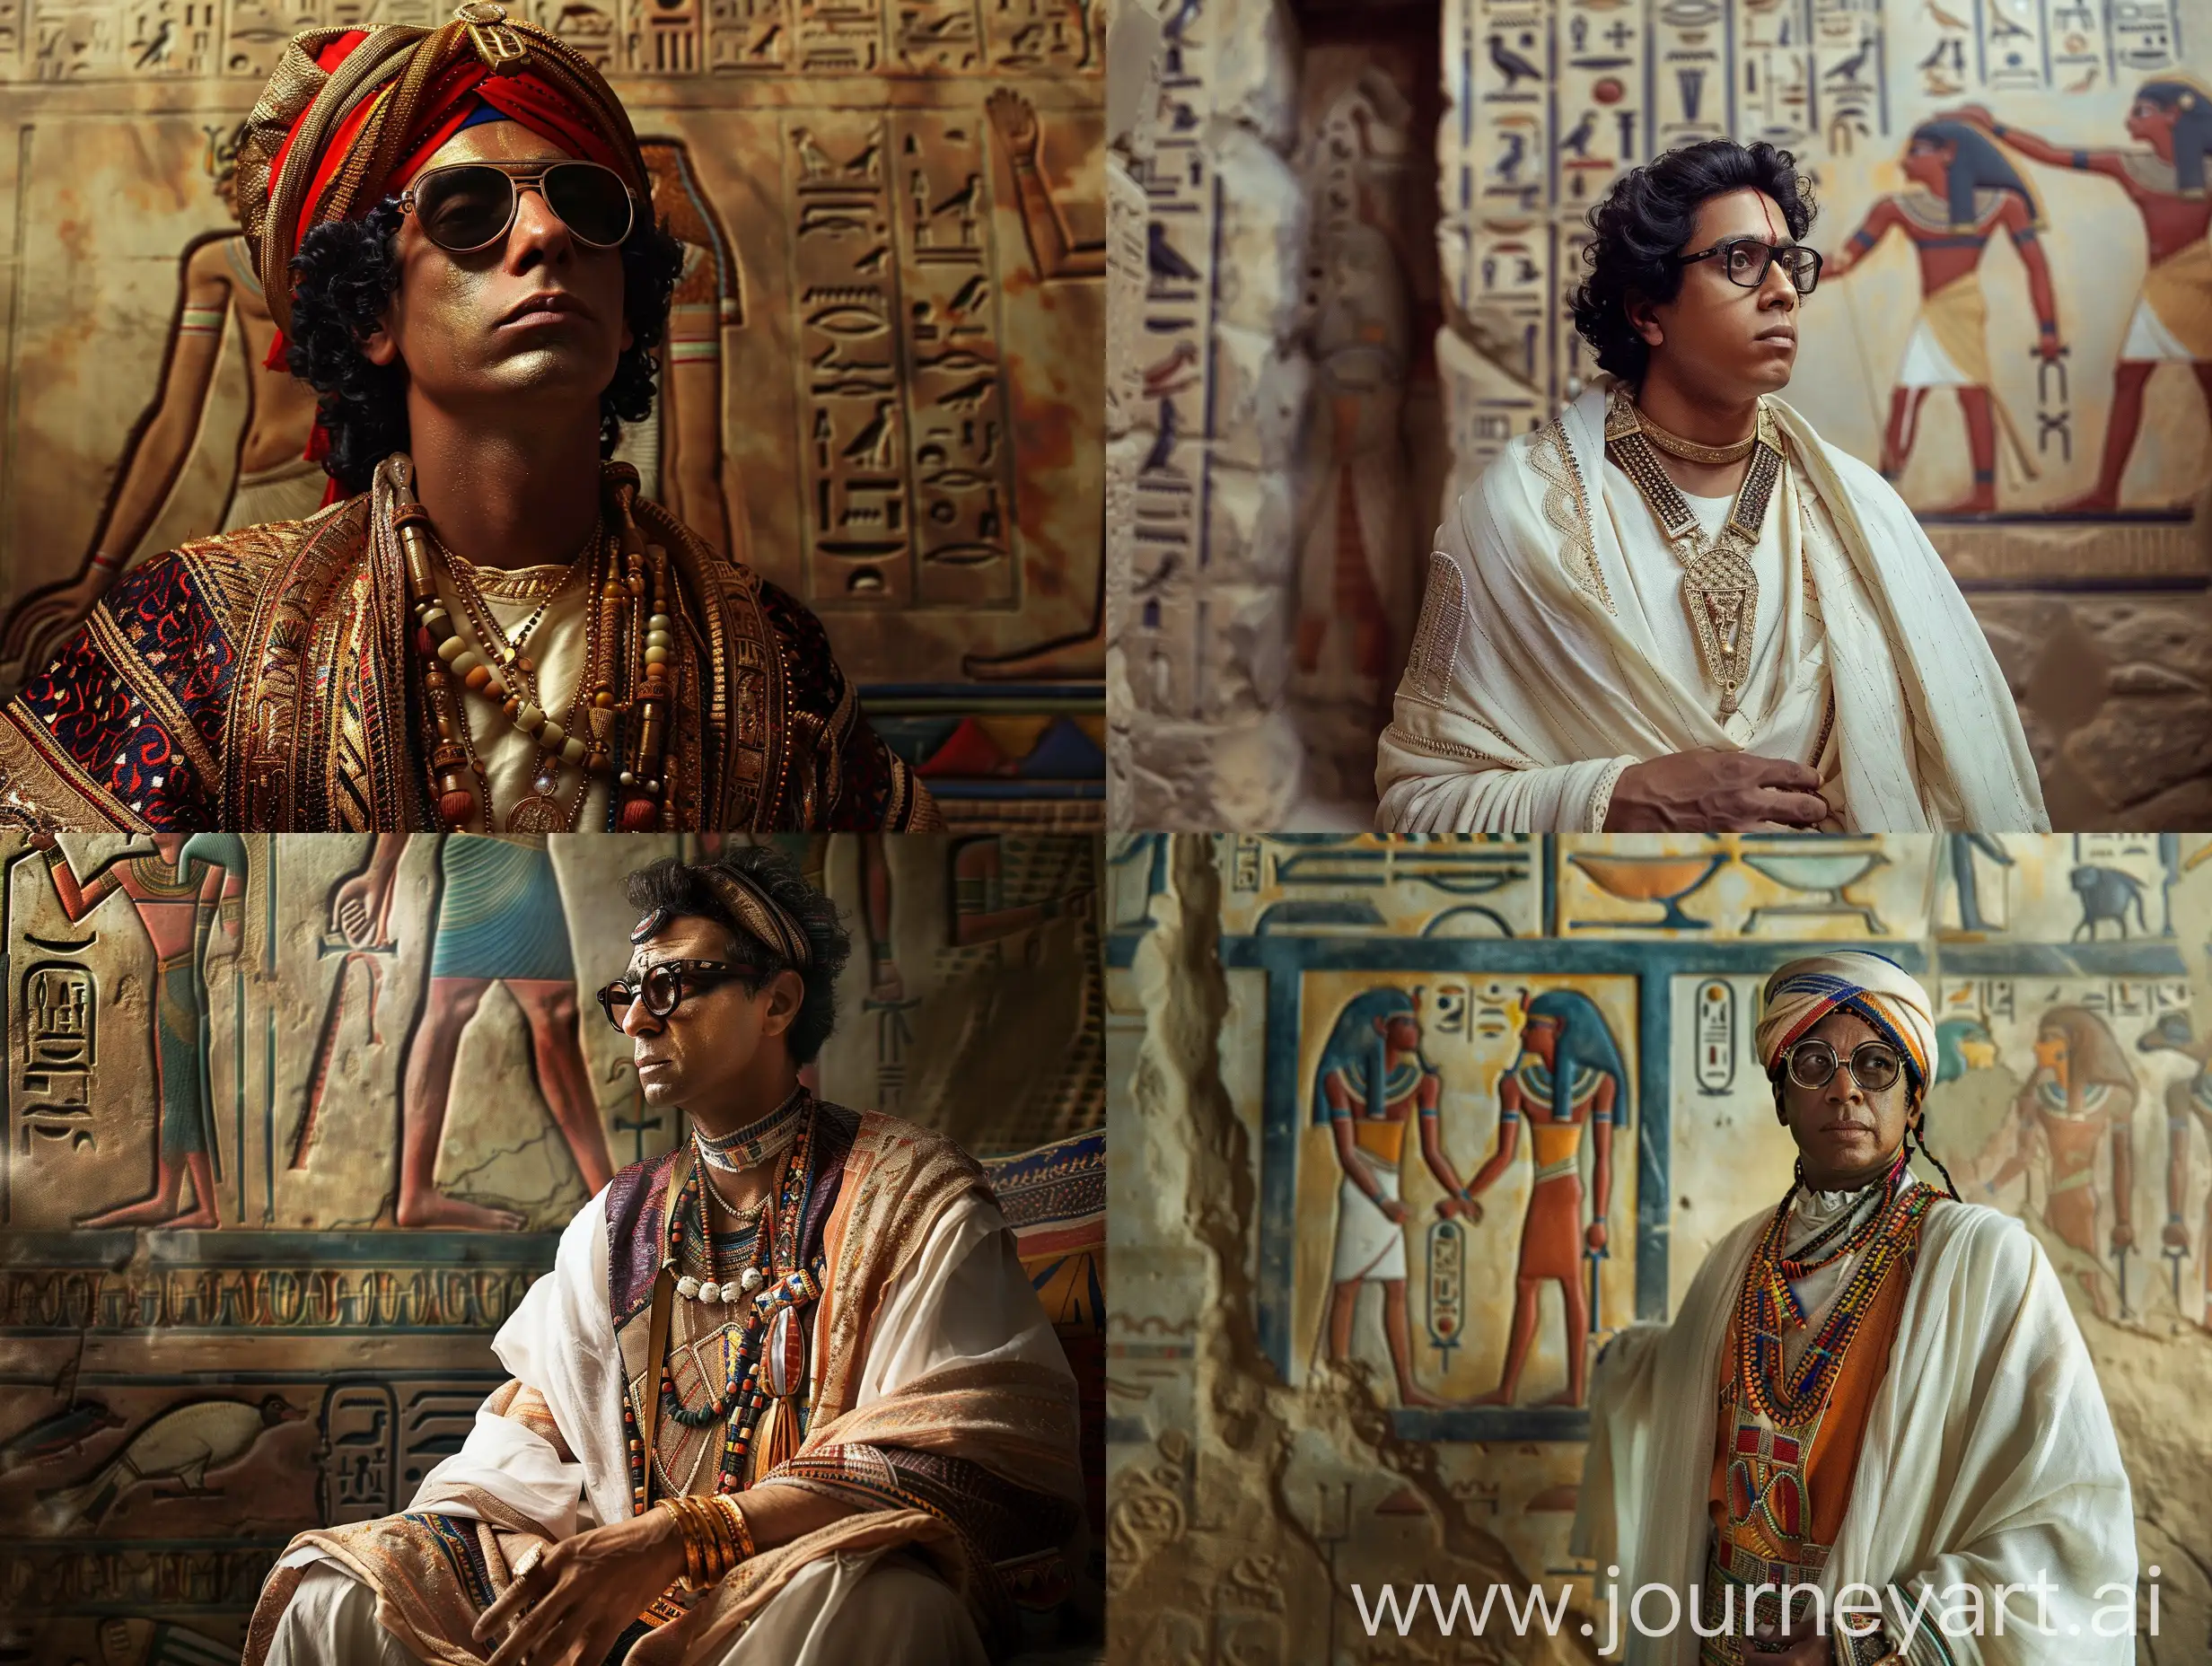 Subject - Realistic photo of raj Thackeray during Ancient Egypt, dressed in traditional ancient Egyptian attire Style - Hyper-Realistic Historical Photography: Emulating lifelike details and authenticity of an ancient Egyptian setting Setting - An authentic Ancient Egyptian background, capturing the essence of historical Egypt Composition - Featuring raj Thackeray adorned in traditional ancient Egyptian clothing, reflecting the attire of the era Camera Model - Utilizing a professional-grade camera known for its ability to capture fine details and realism, such as the Canon EOS R5, to convey lifelike and detailed imagery Additional Info - The image aims to depict raj Thackeray realistically in Ancient Egypt, emphasizing authenticity in attire, setting, and the ambiance of historical Egypt, merging realism with the historical context of Ancient Egyptian civilization